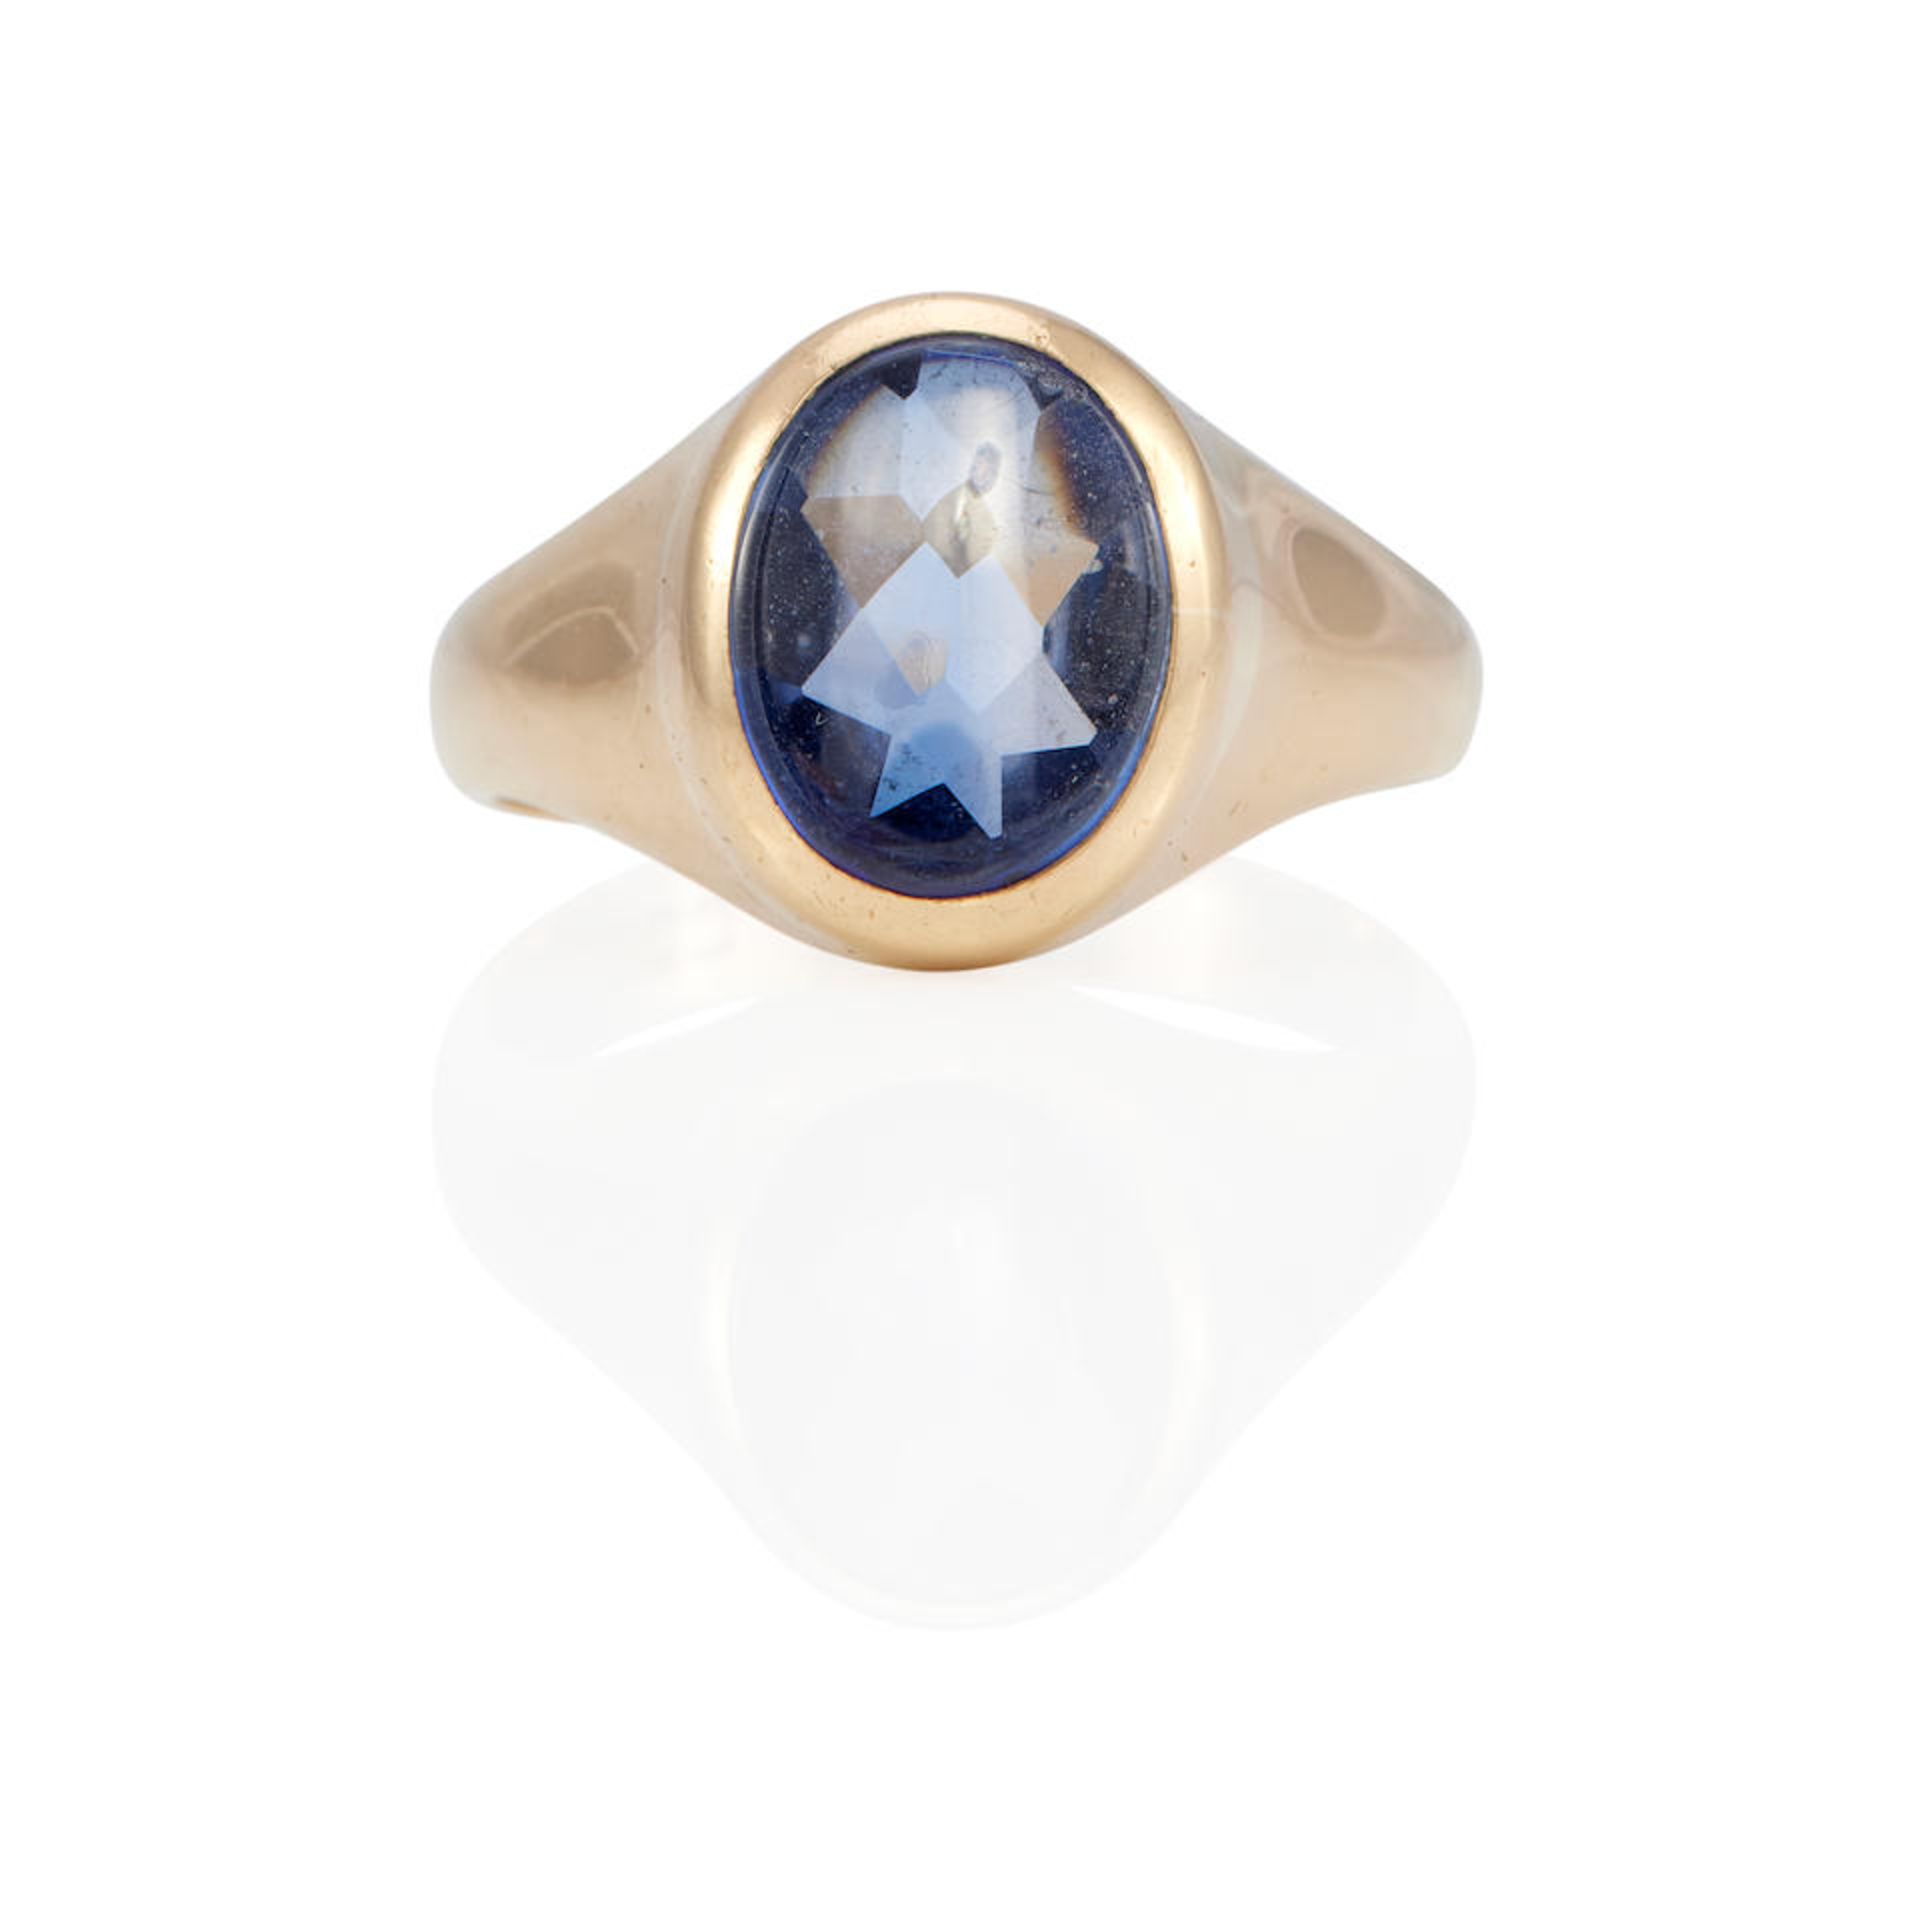 A 9K GOLD AND SAPPHIRE RING